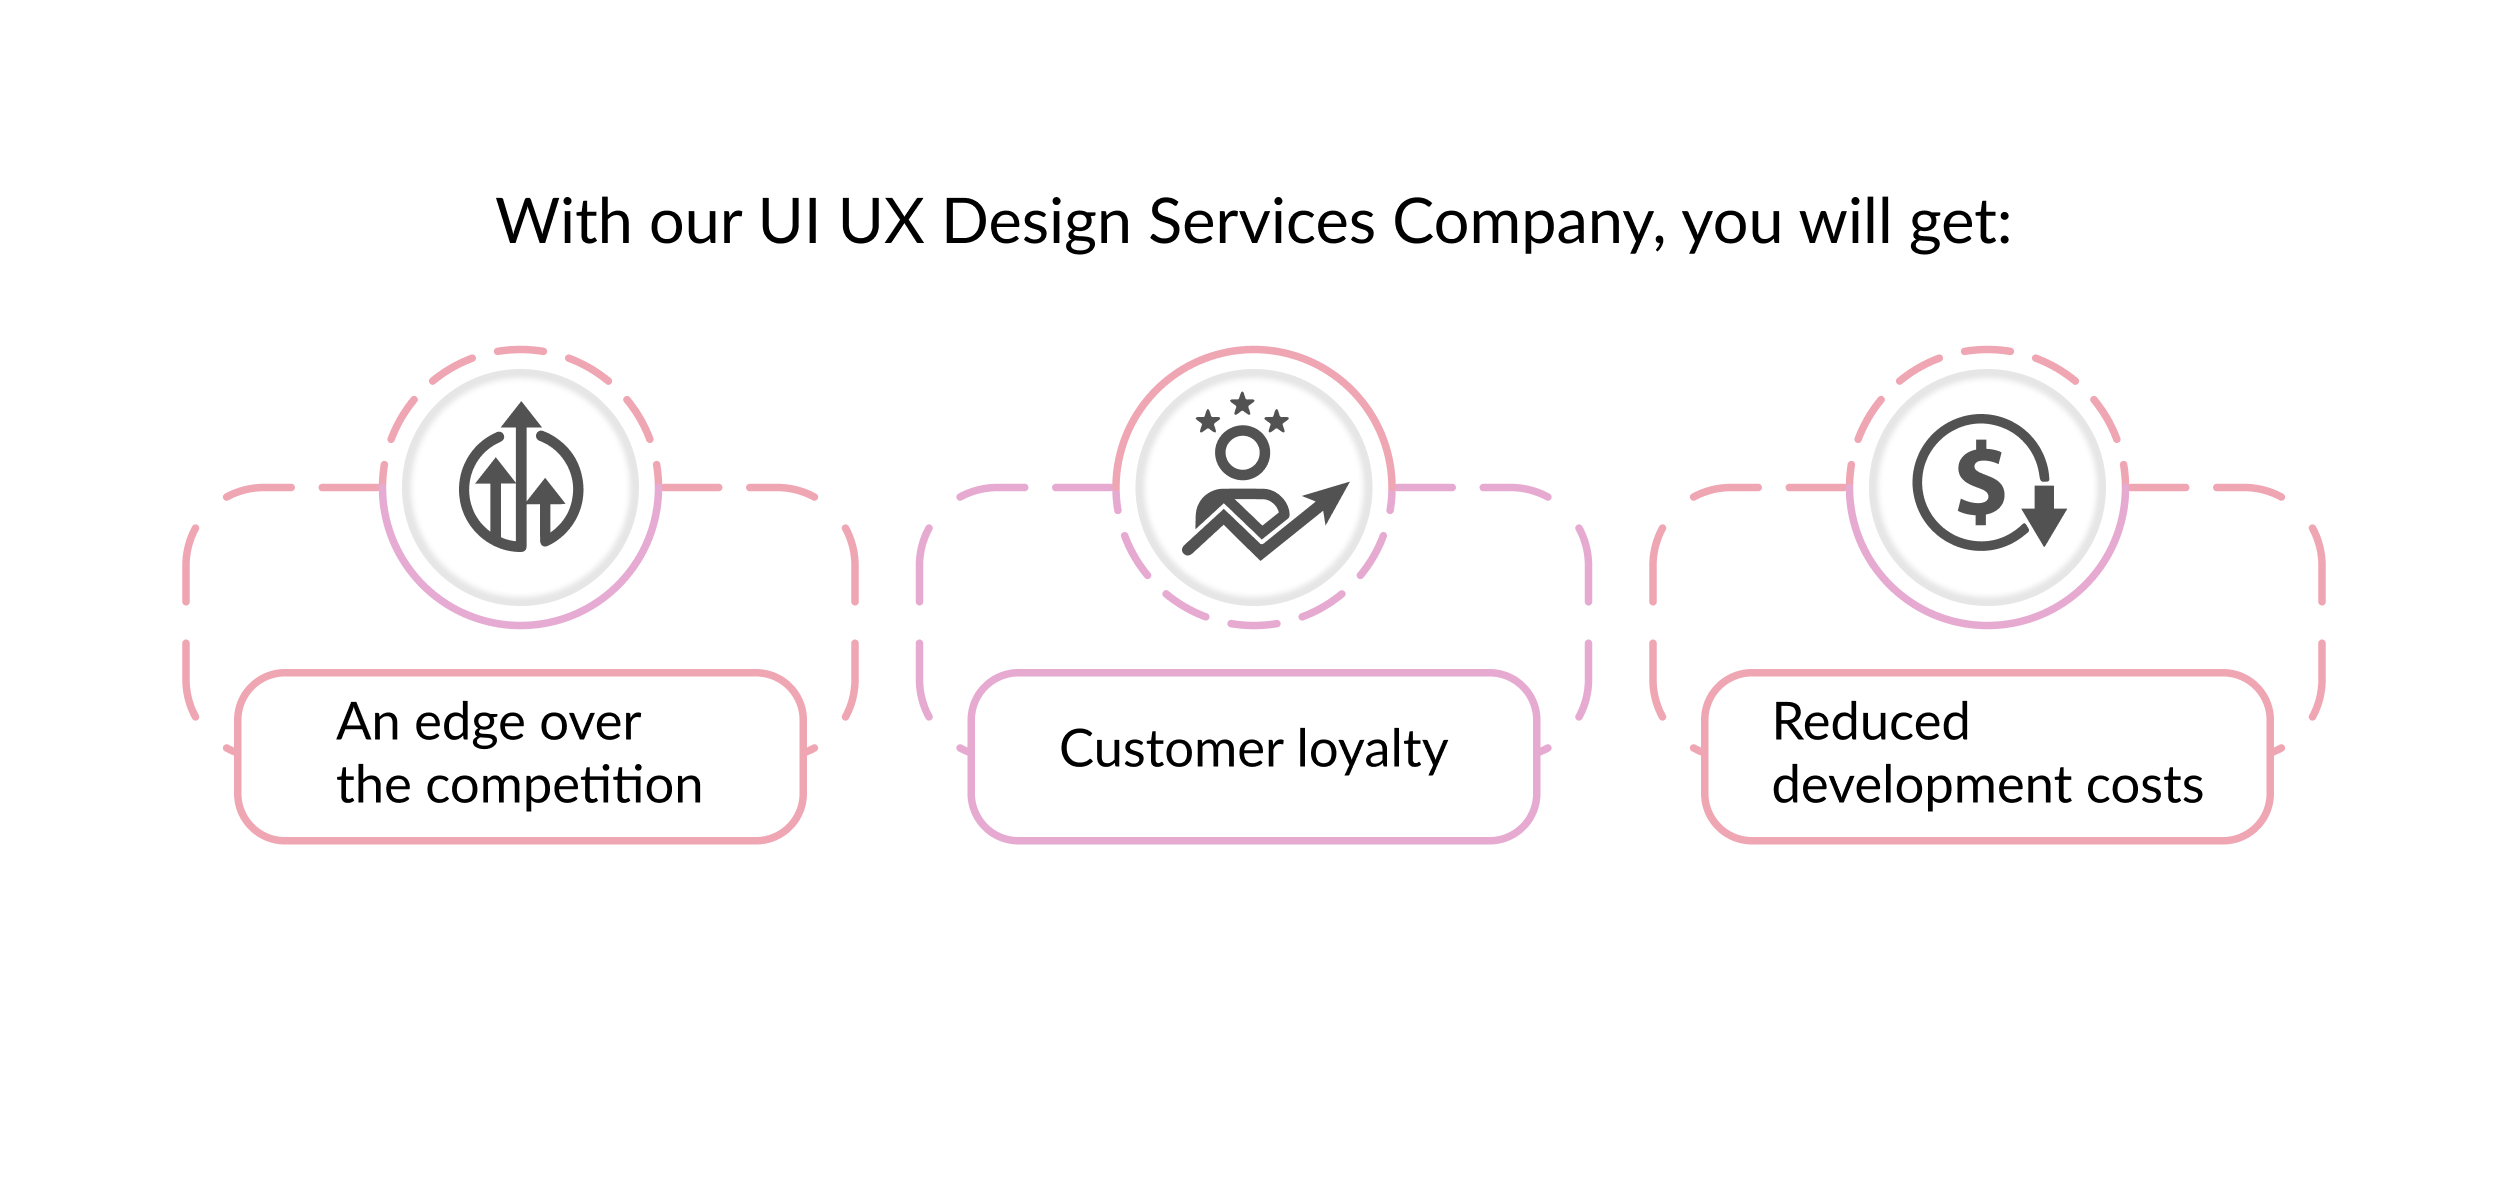 With our UI UX Design Services Company, you will get: